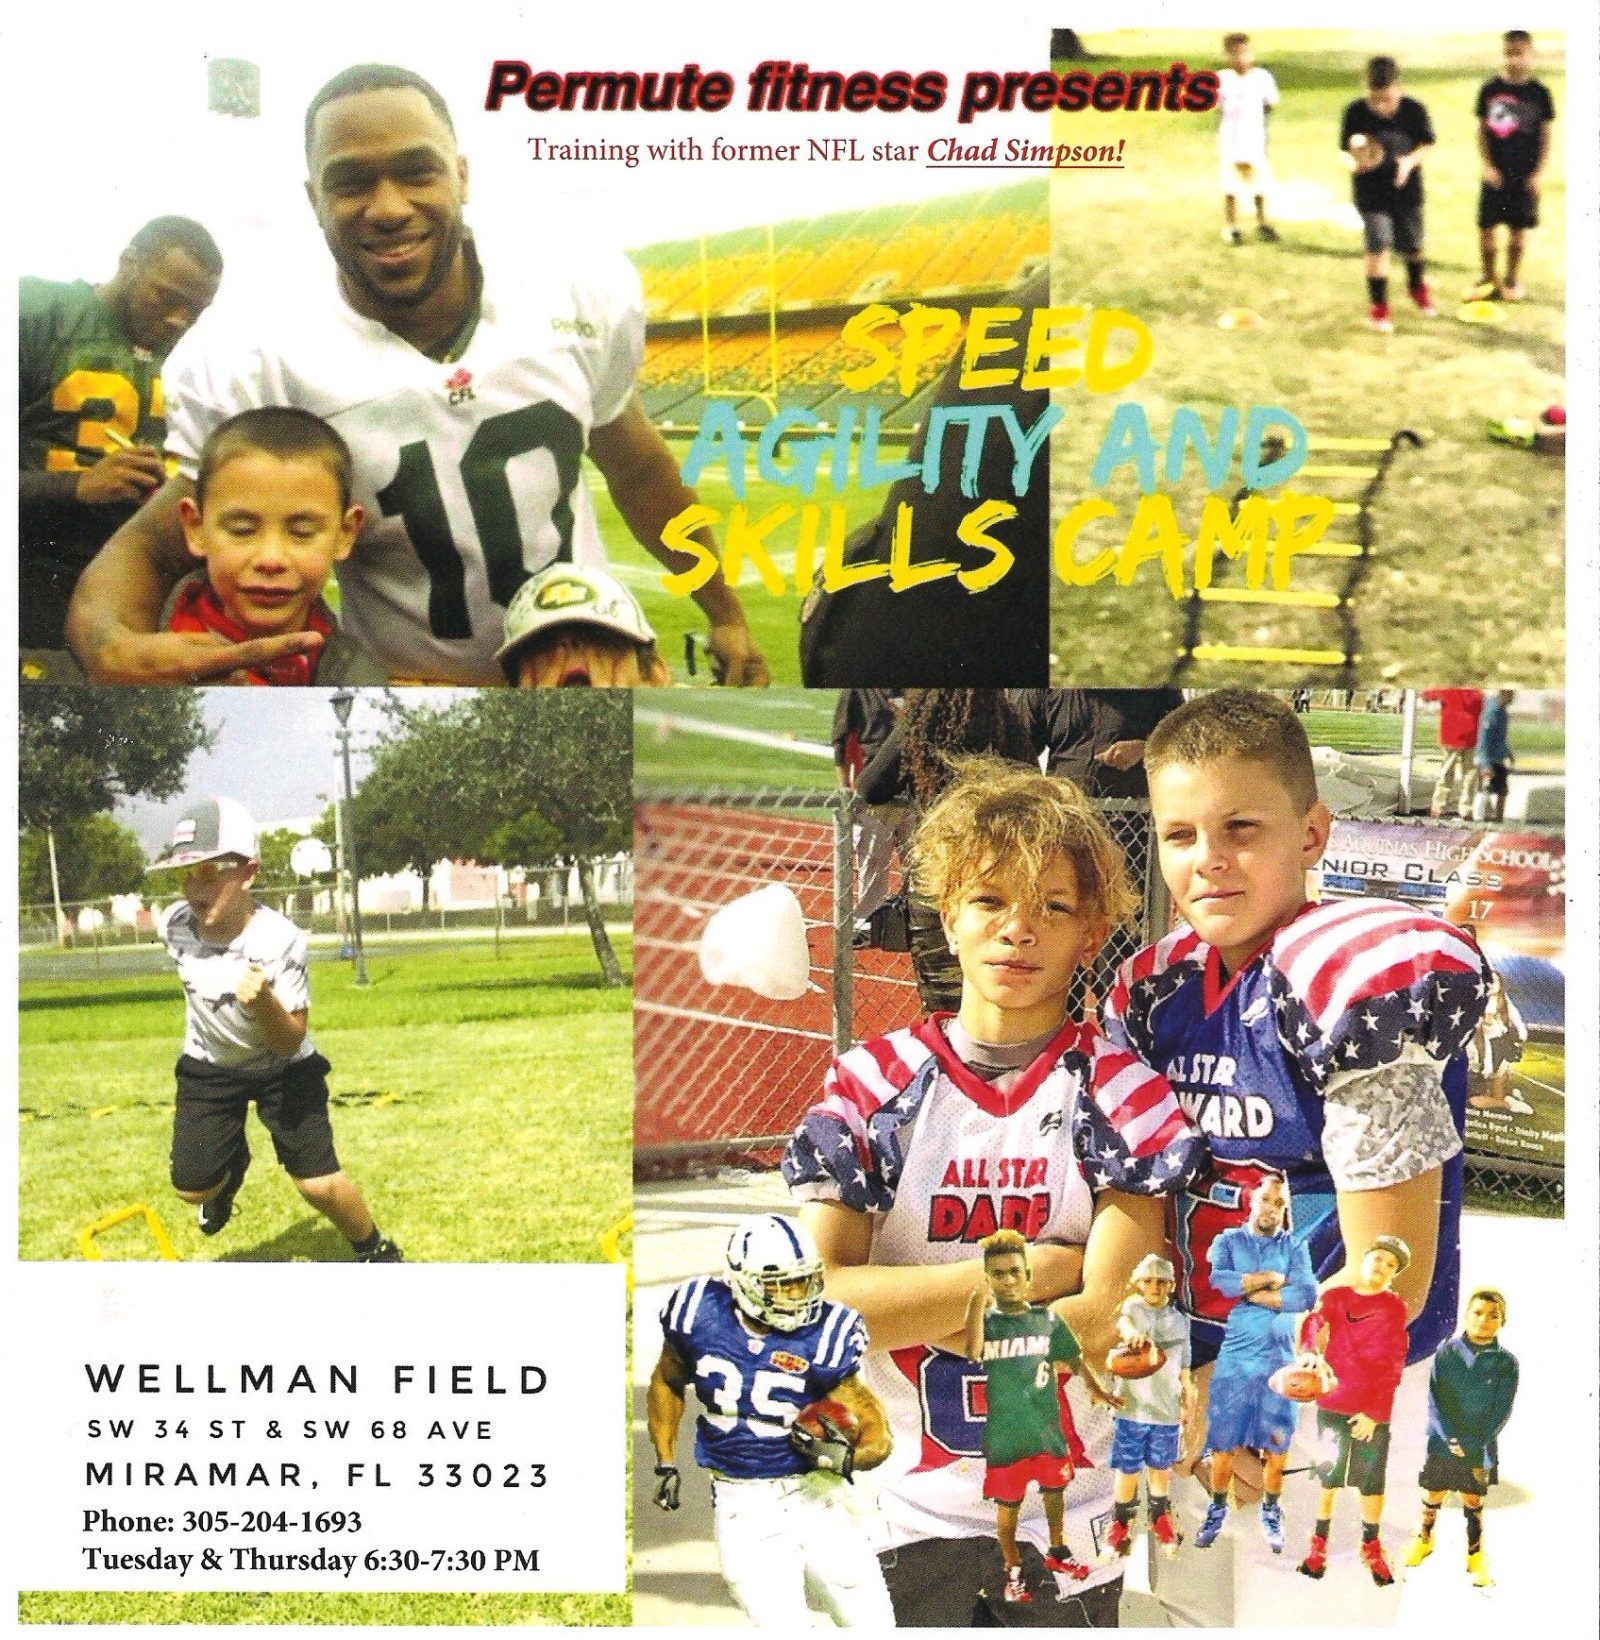 After School Programs Available with Former NFL Star Chad Simpson.